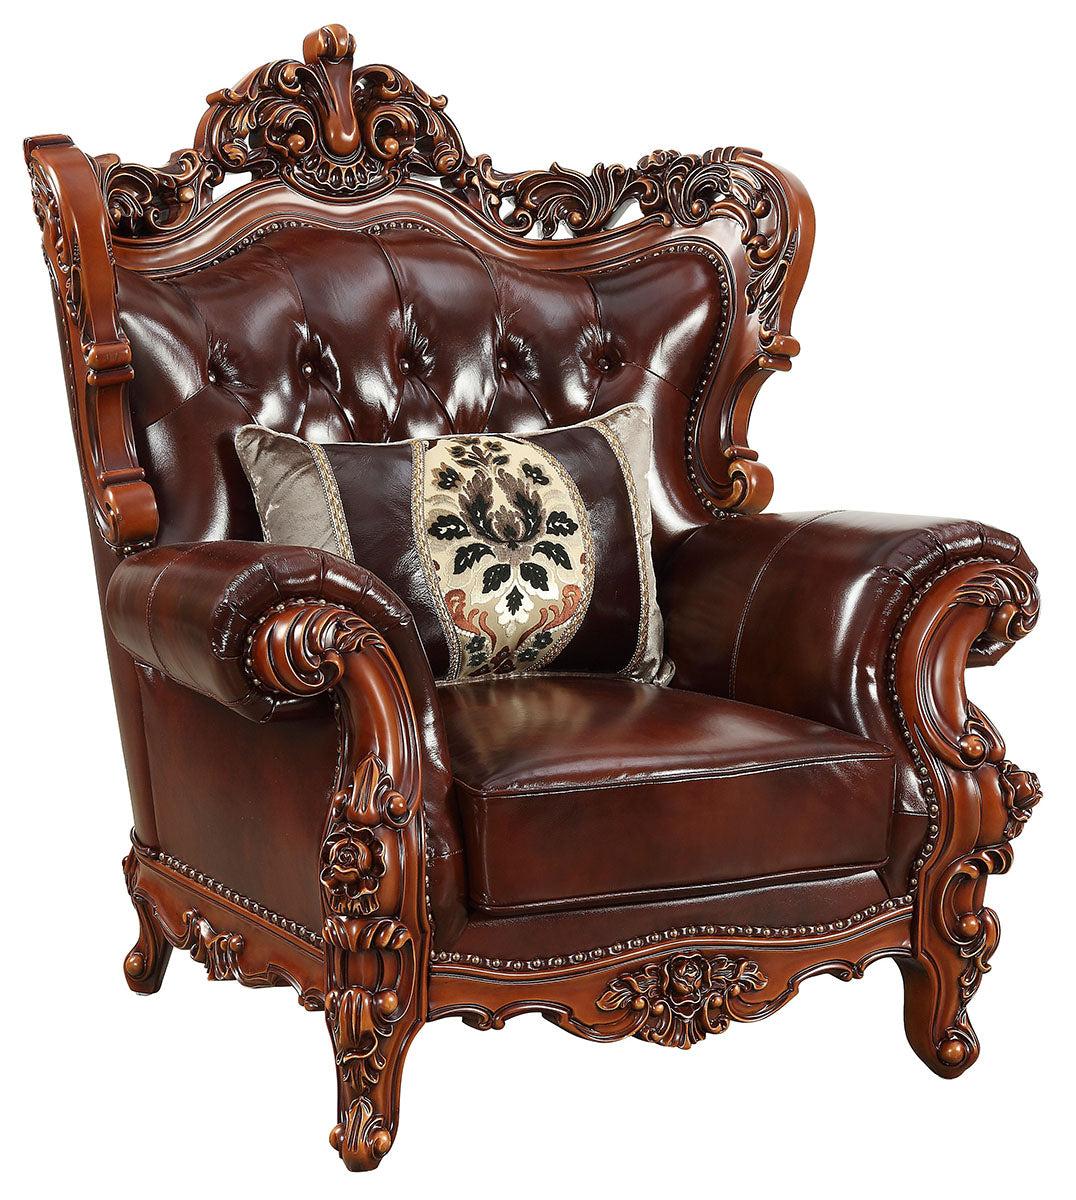 Acme Furniture Eustoma Chair in Cherry and Walnut 53067  Las Vegas Furniture Stores